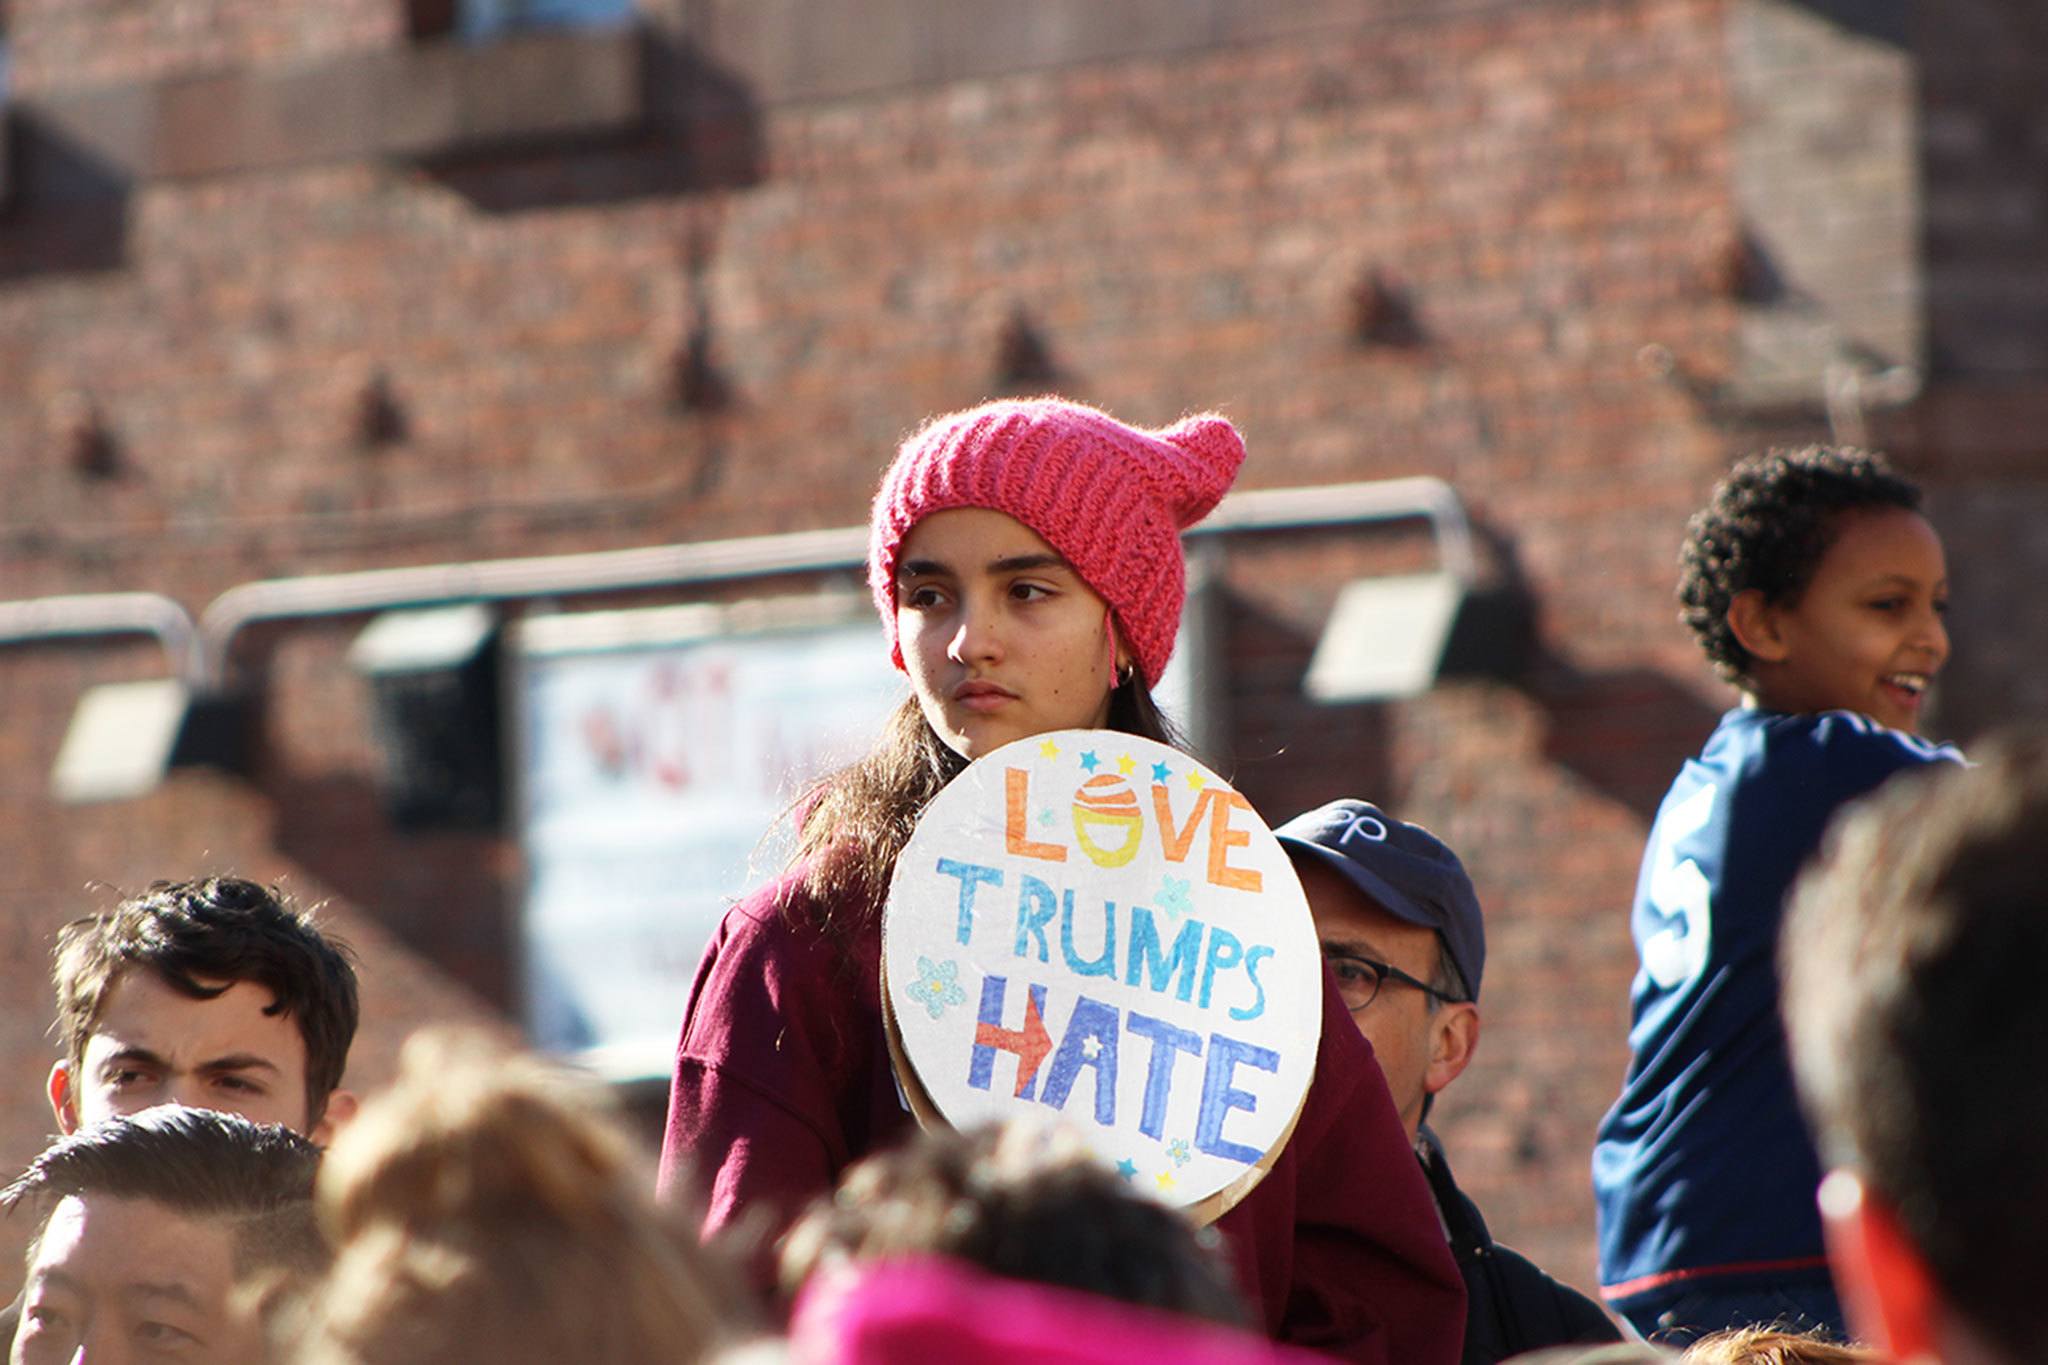 PHOTOS | Eastside residents vow not to be silenced at Women’s March